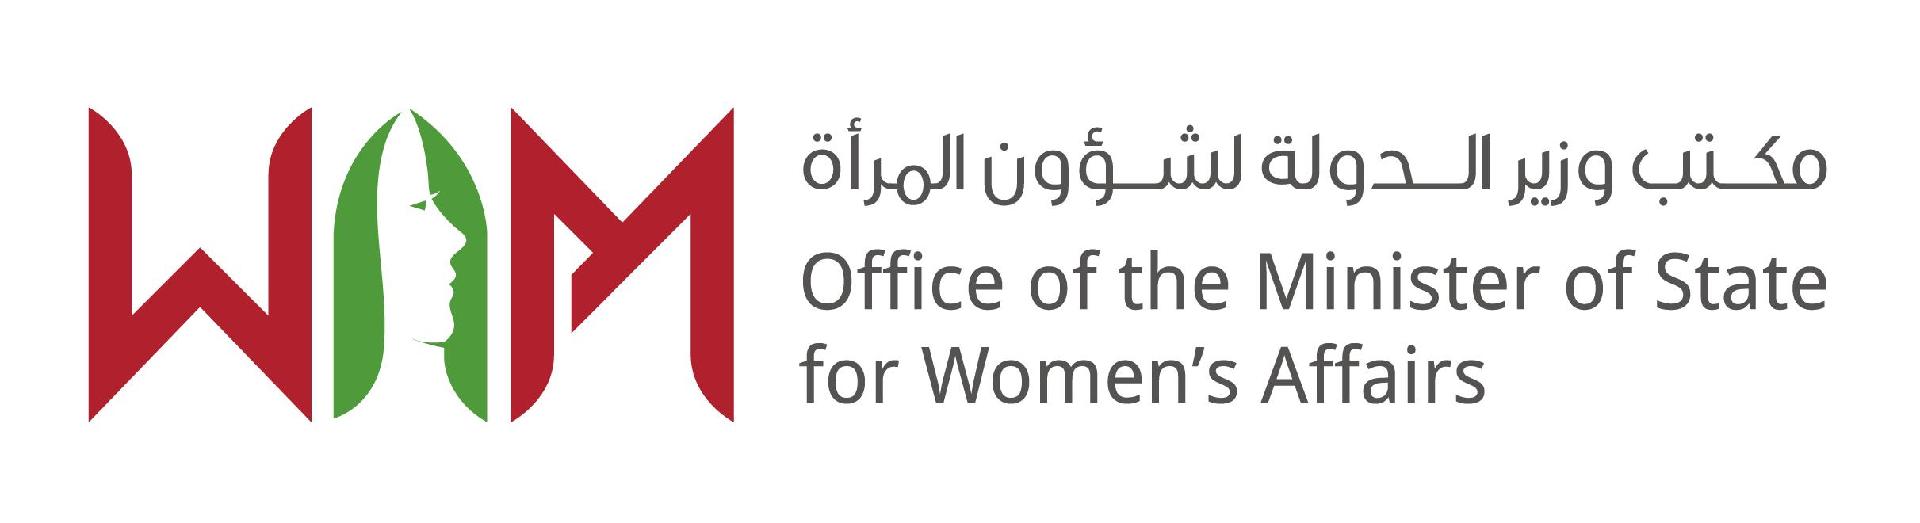 Office of the Minister of State for Women's Affairs (OMSWA)